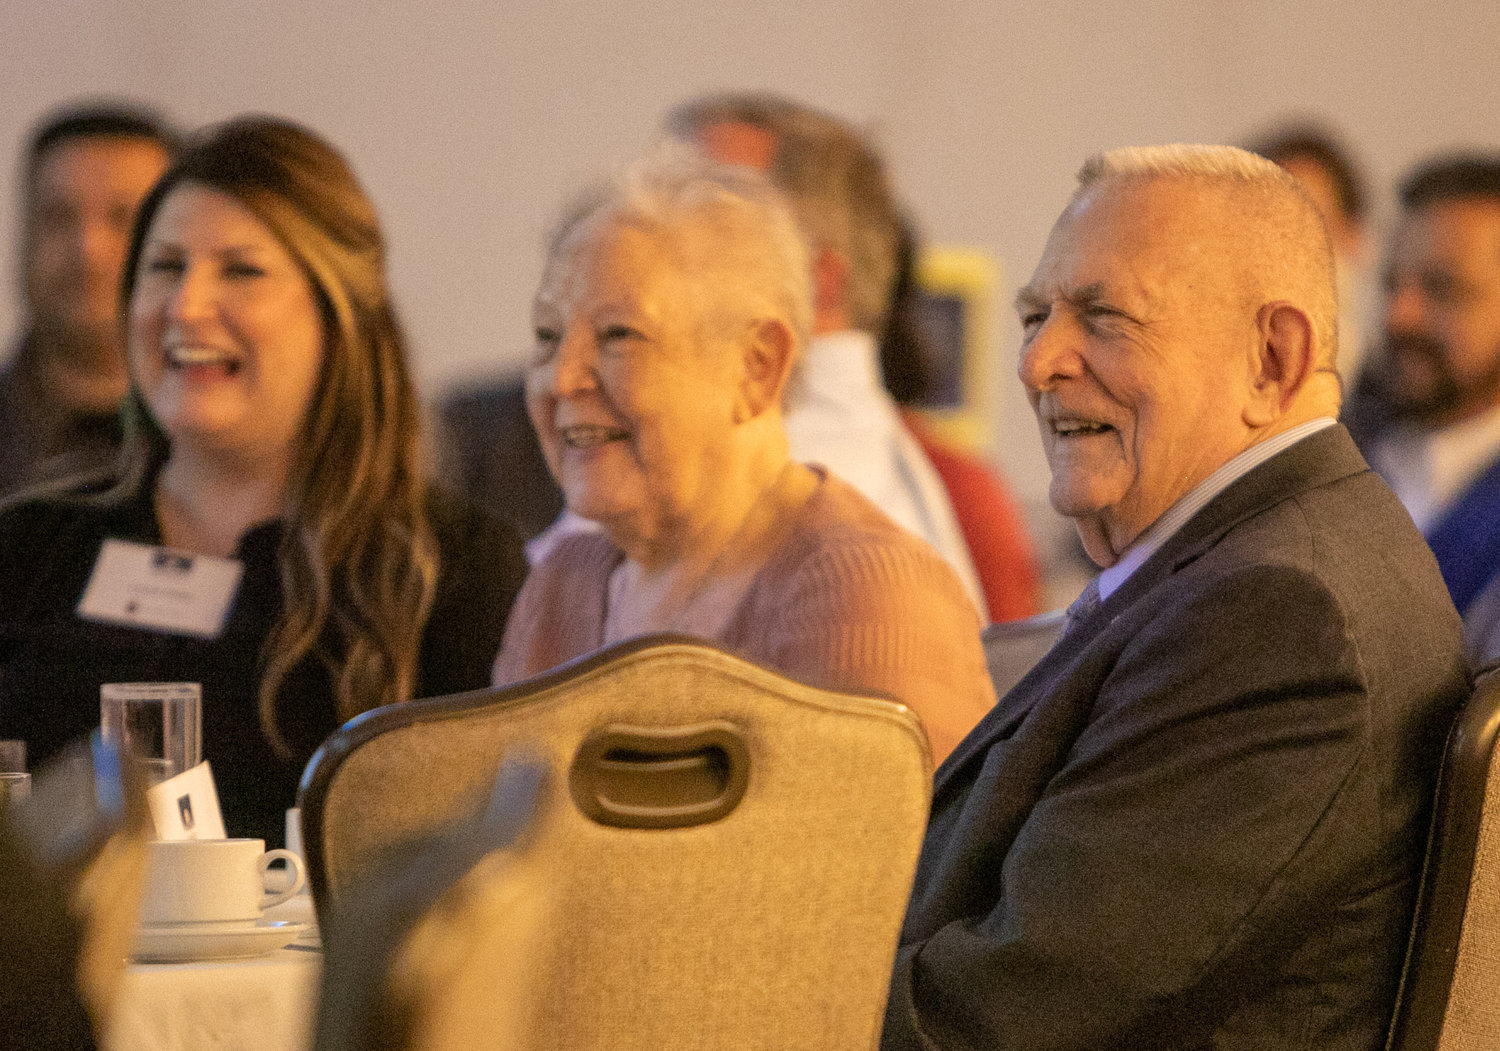 Gene Kranz, right, former flight director for Apollo 11, smiles alongside his wife, Marta, during the 2019 Archdiocese of Galveston-Houston Prayer Breakfast in Houston July 30. Gene Kranz, who served as the event’s speaker, is a parishioner at Shrine of the True Cross Catholic Church in Dickinson, Texas, near Houston.